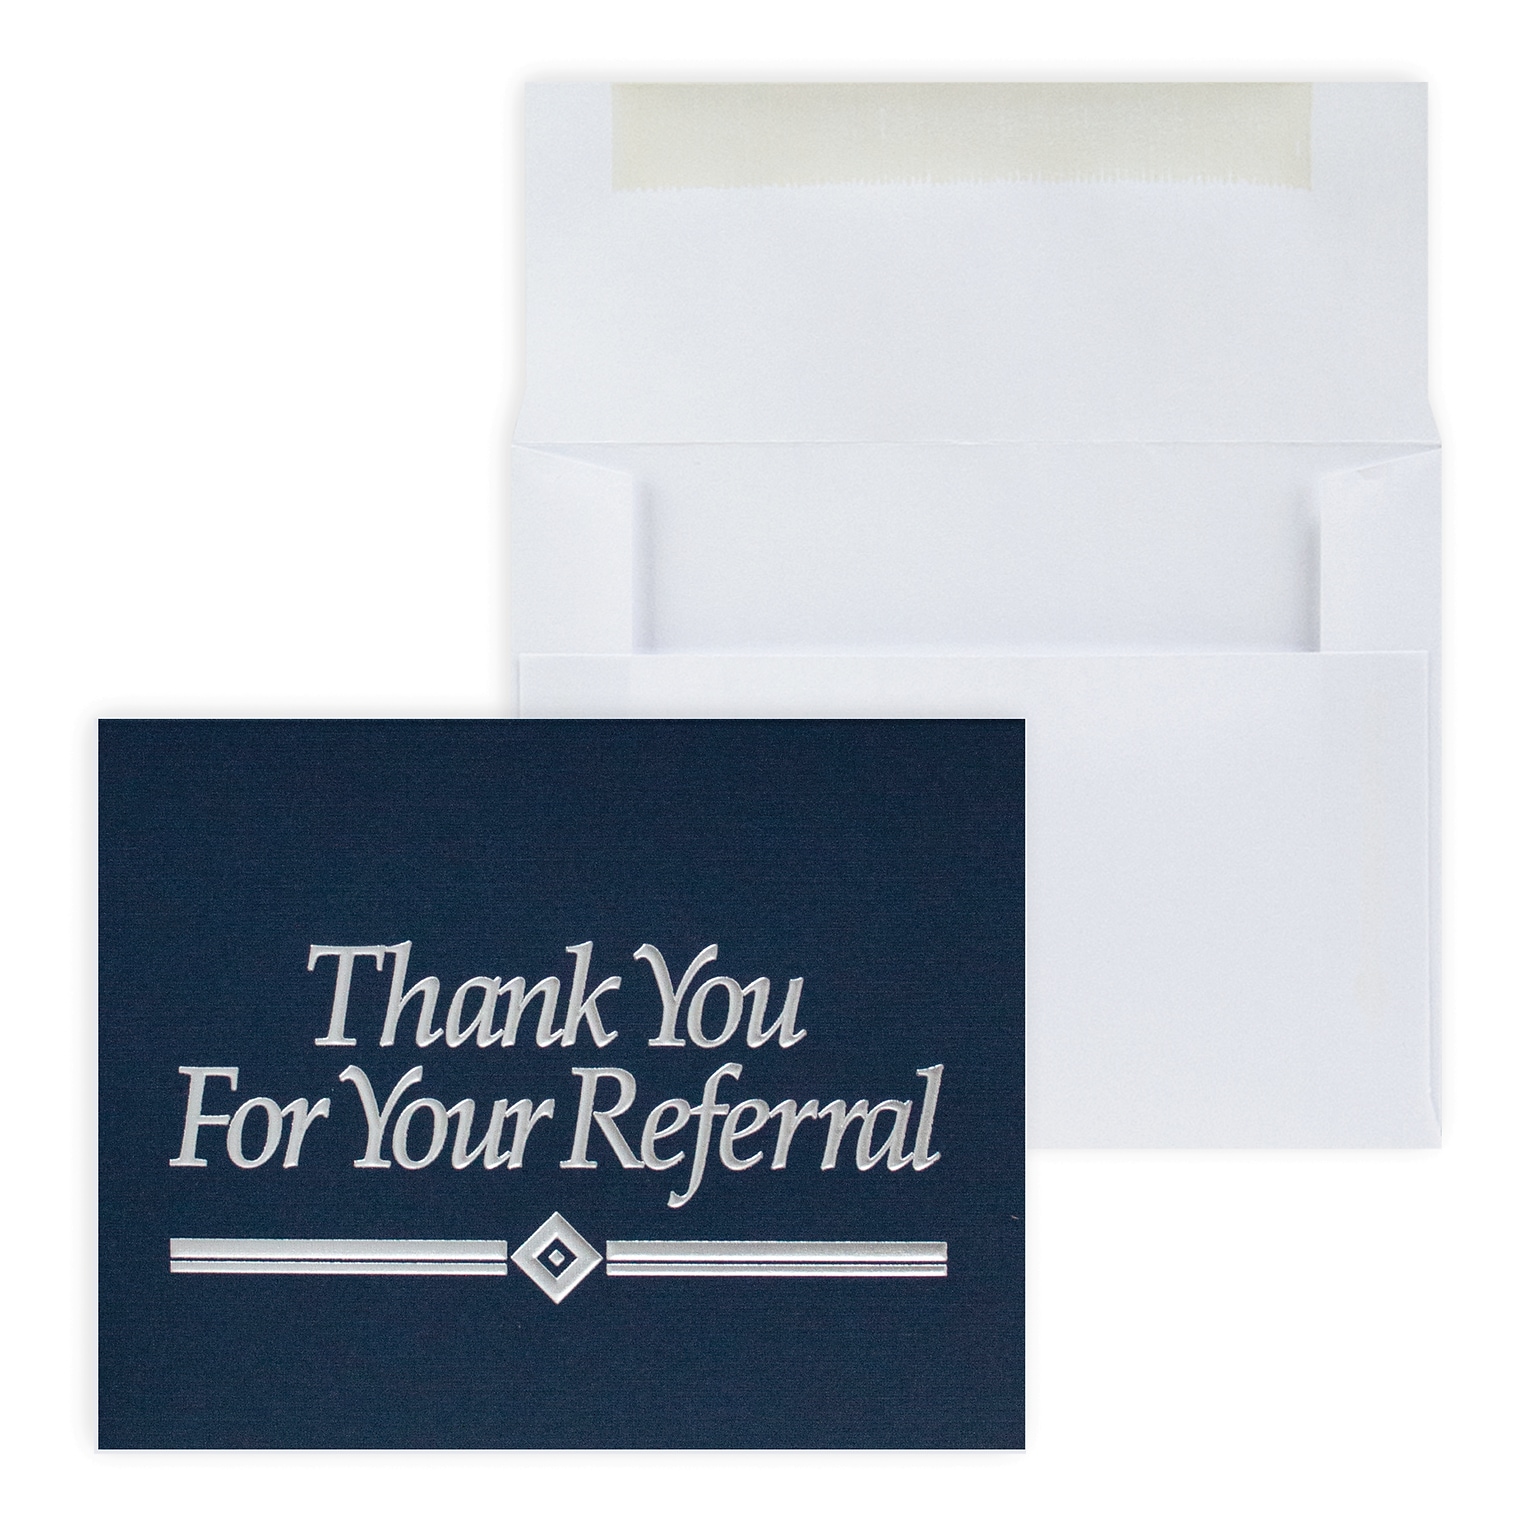 Custom Thank You Referral Greeting Cards with Foil, With Envelopes, 4-1/4 x 5-3/8, 25 Cards per Set